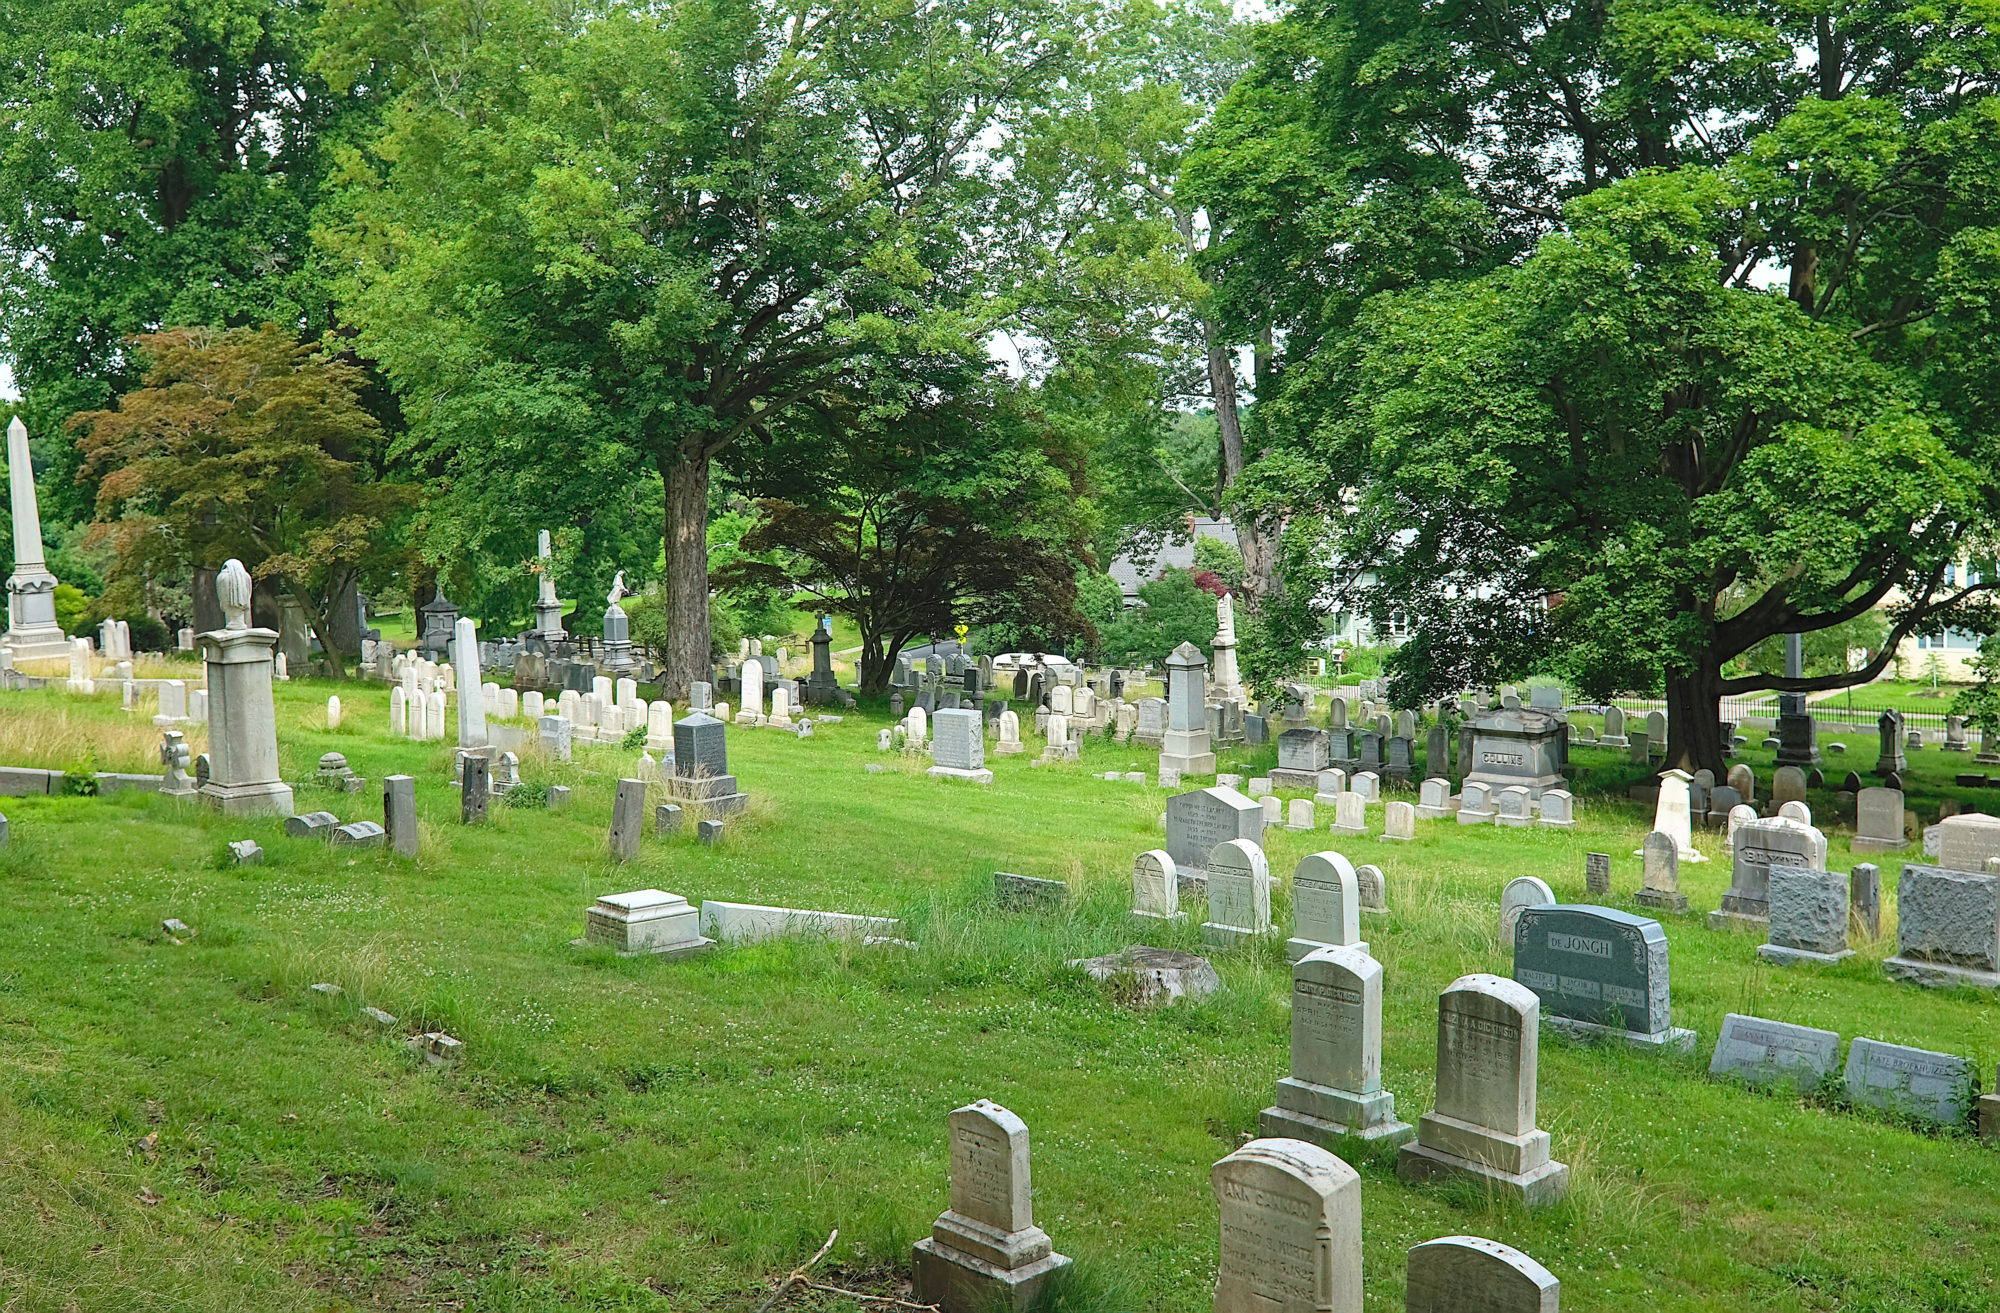 Headstones at Mount Hope Cemetery